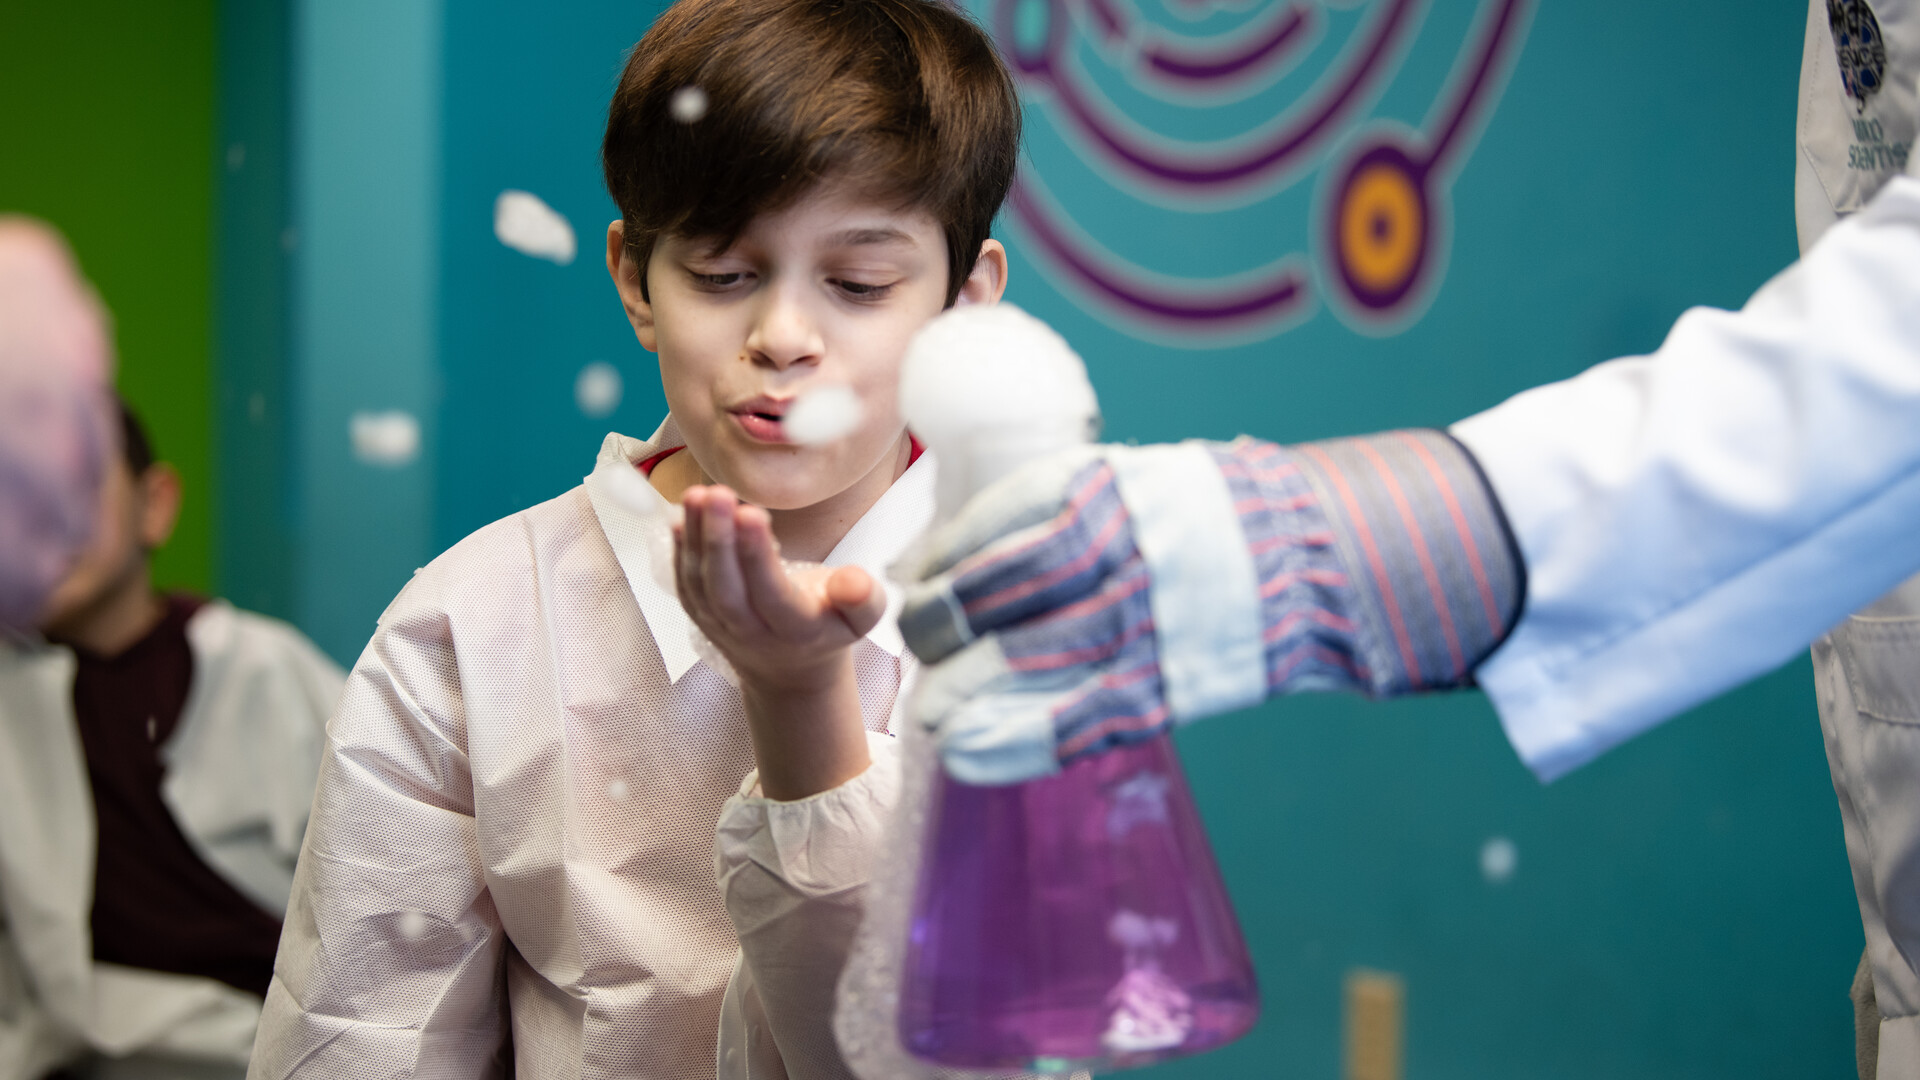 A child is seen blowing at the foam in his hand as a result of an overflowing flask full of bubbly purple liquid during a science experiment.